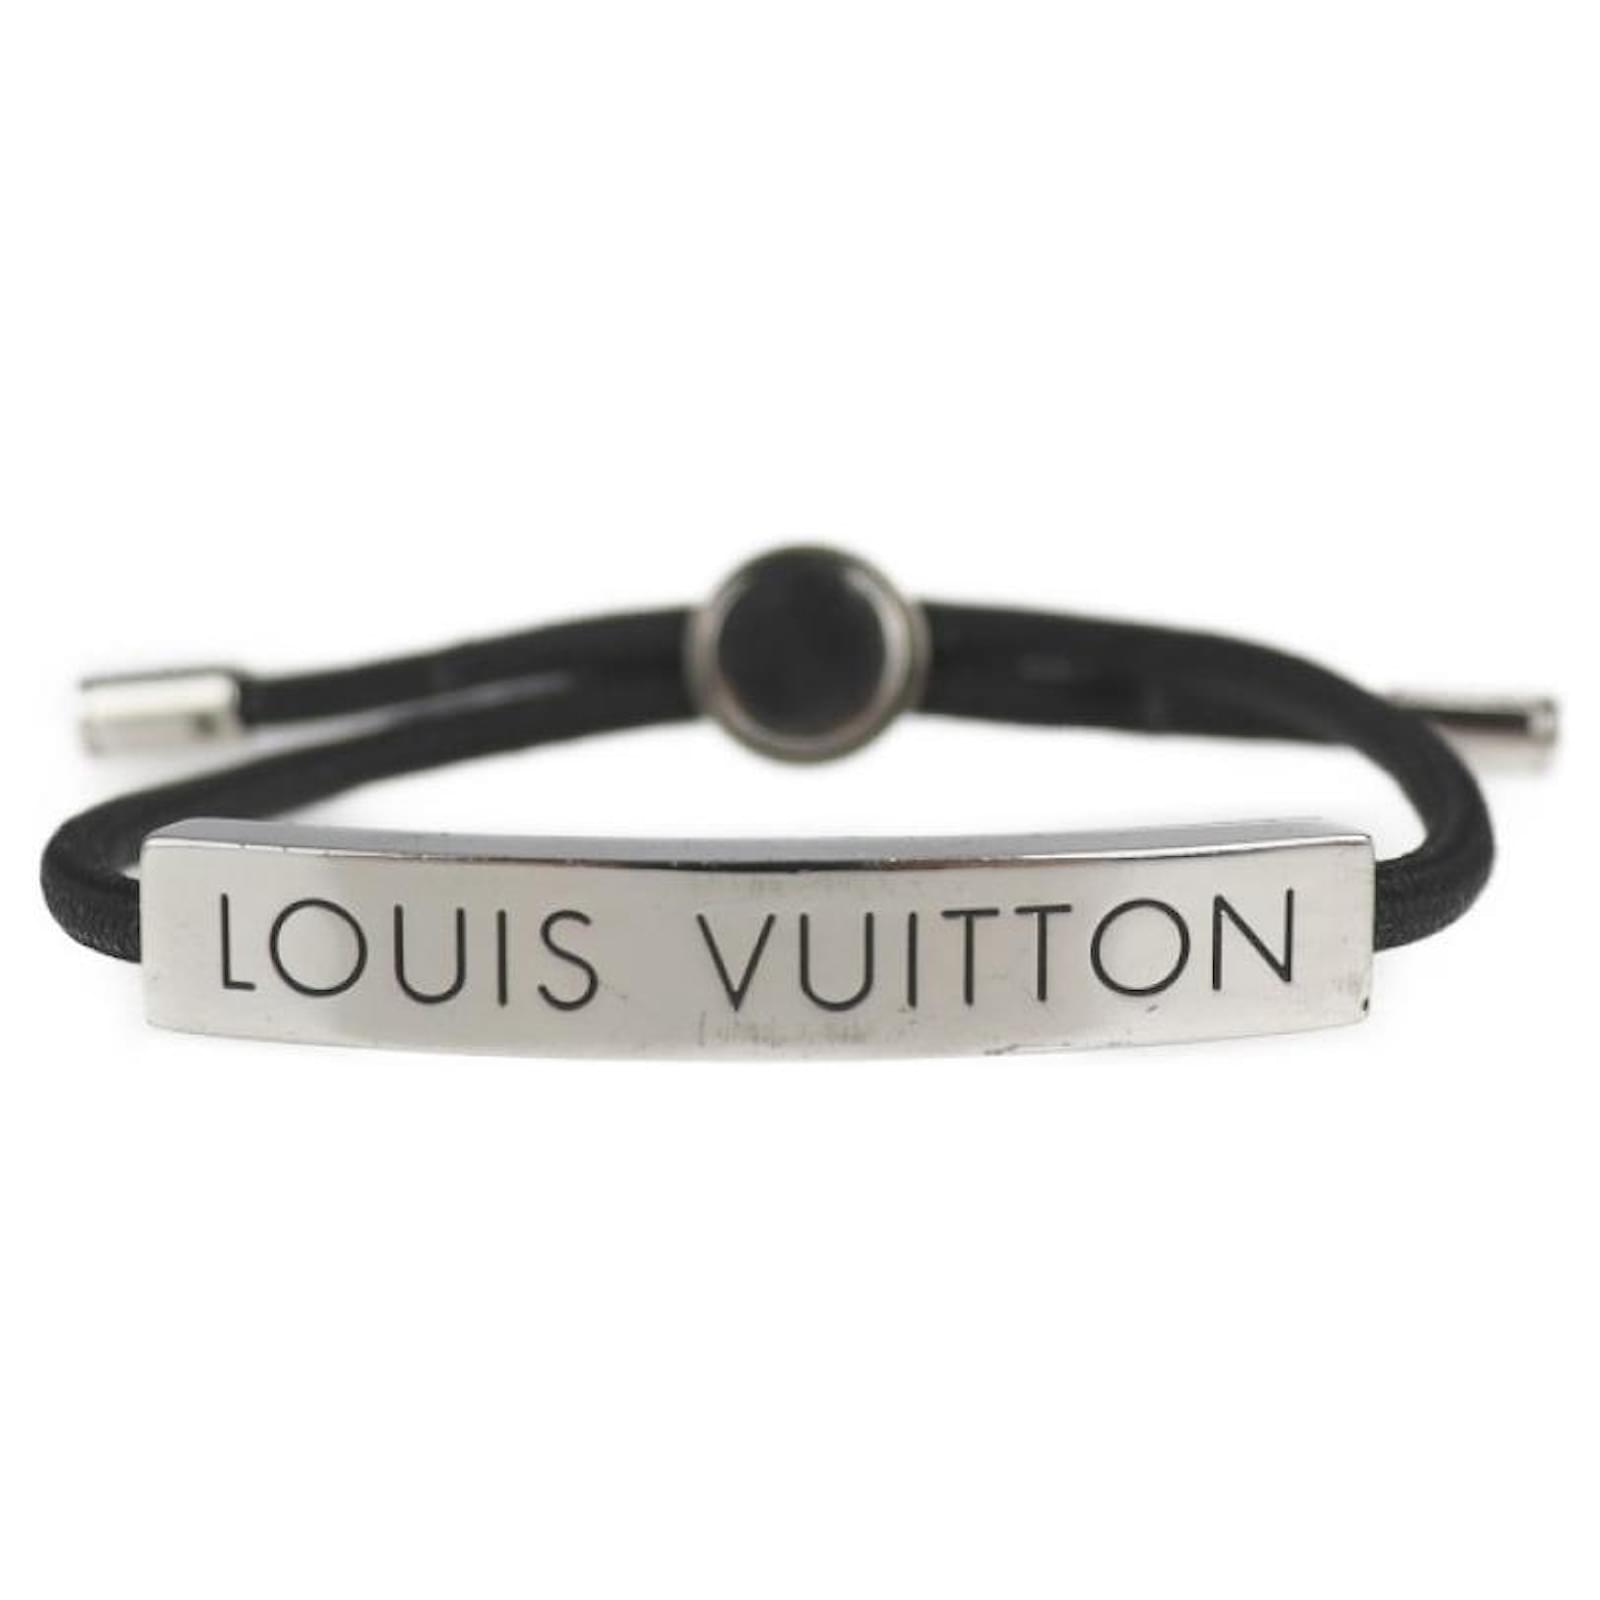 Stainless steel Lv bangle